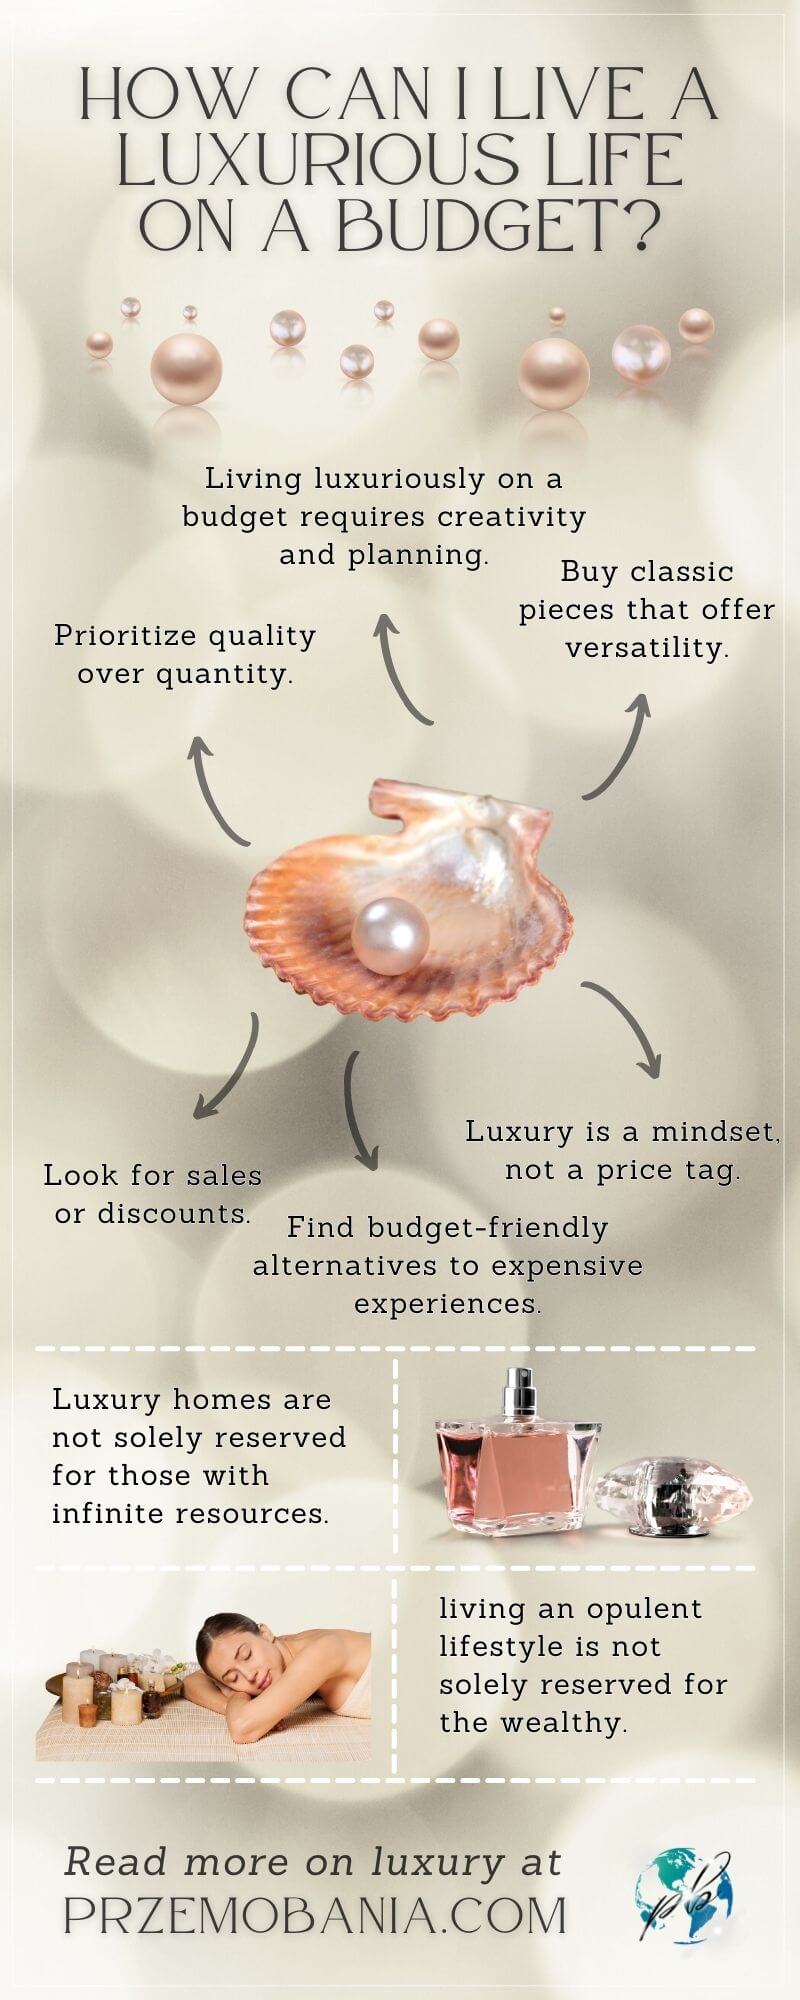 How can I live a luxurious life on a budget infographic